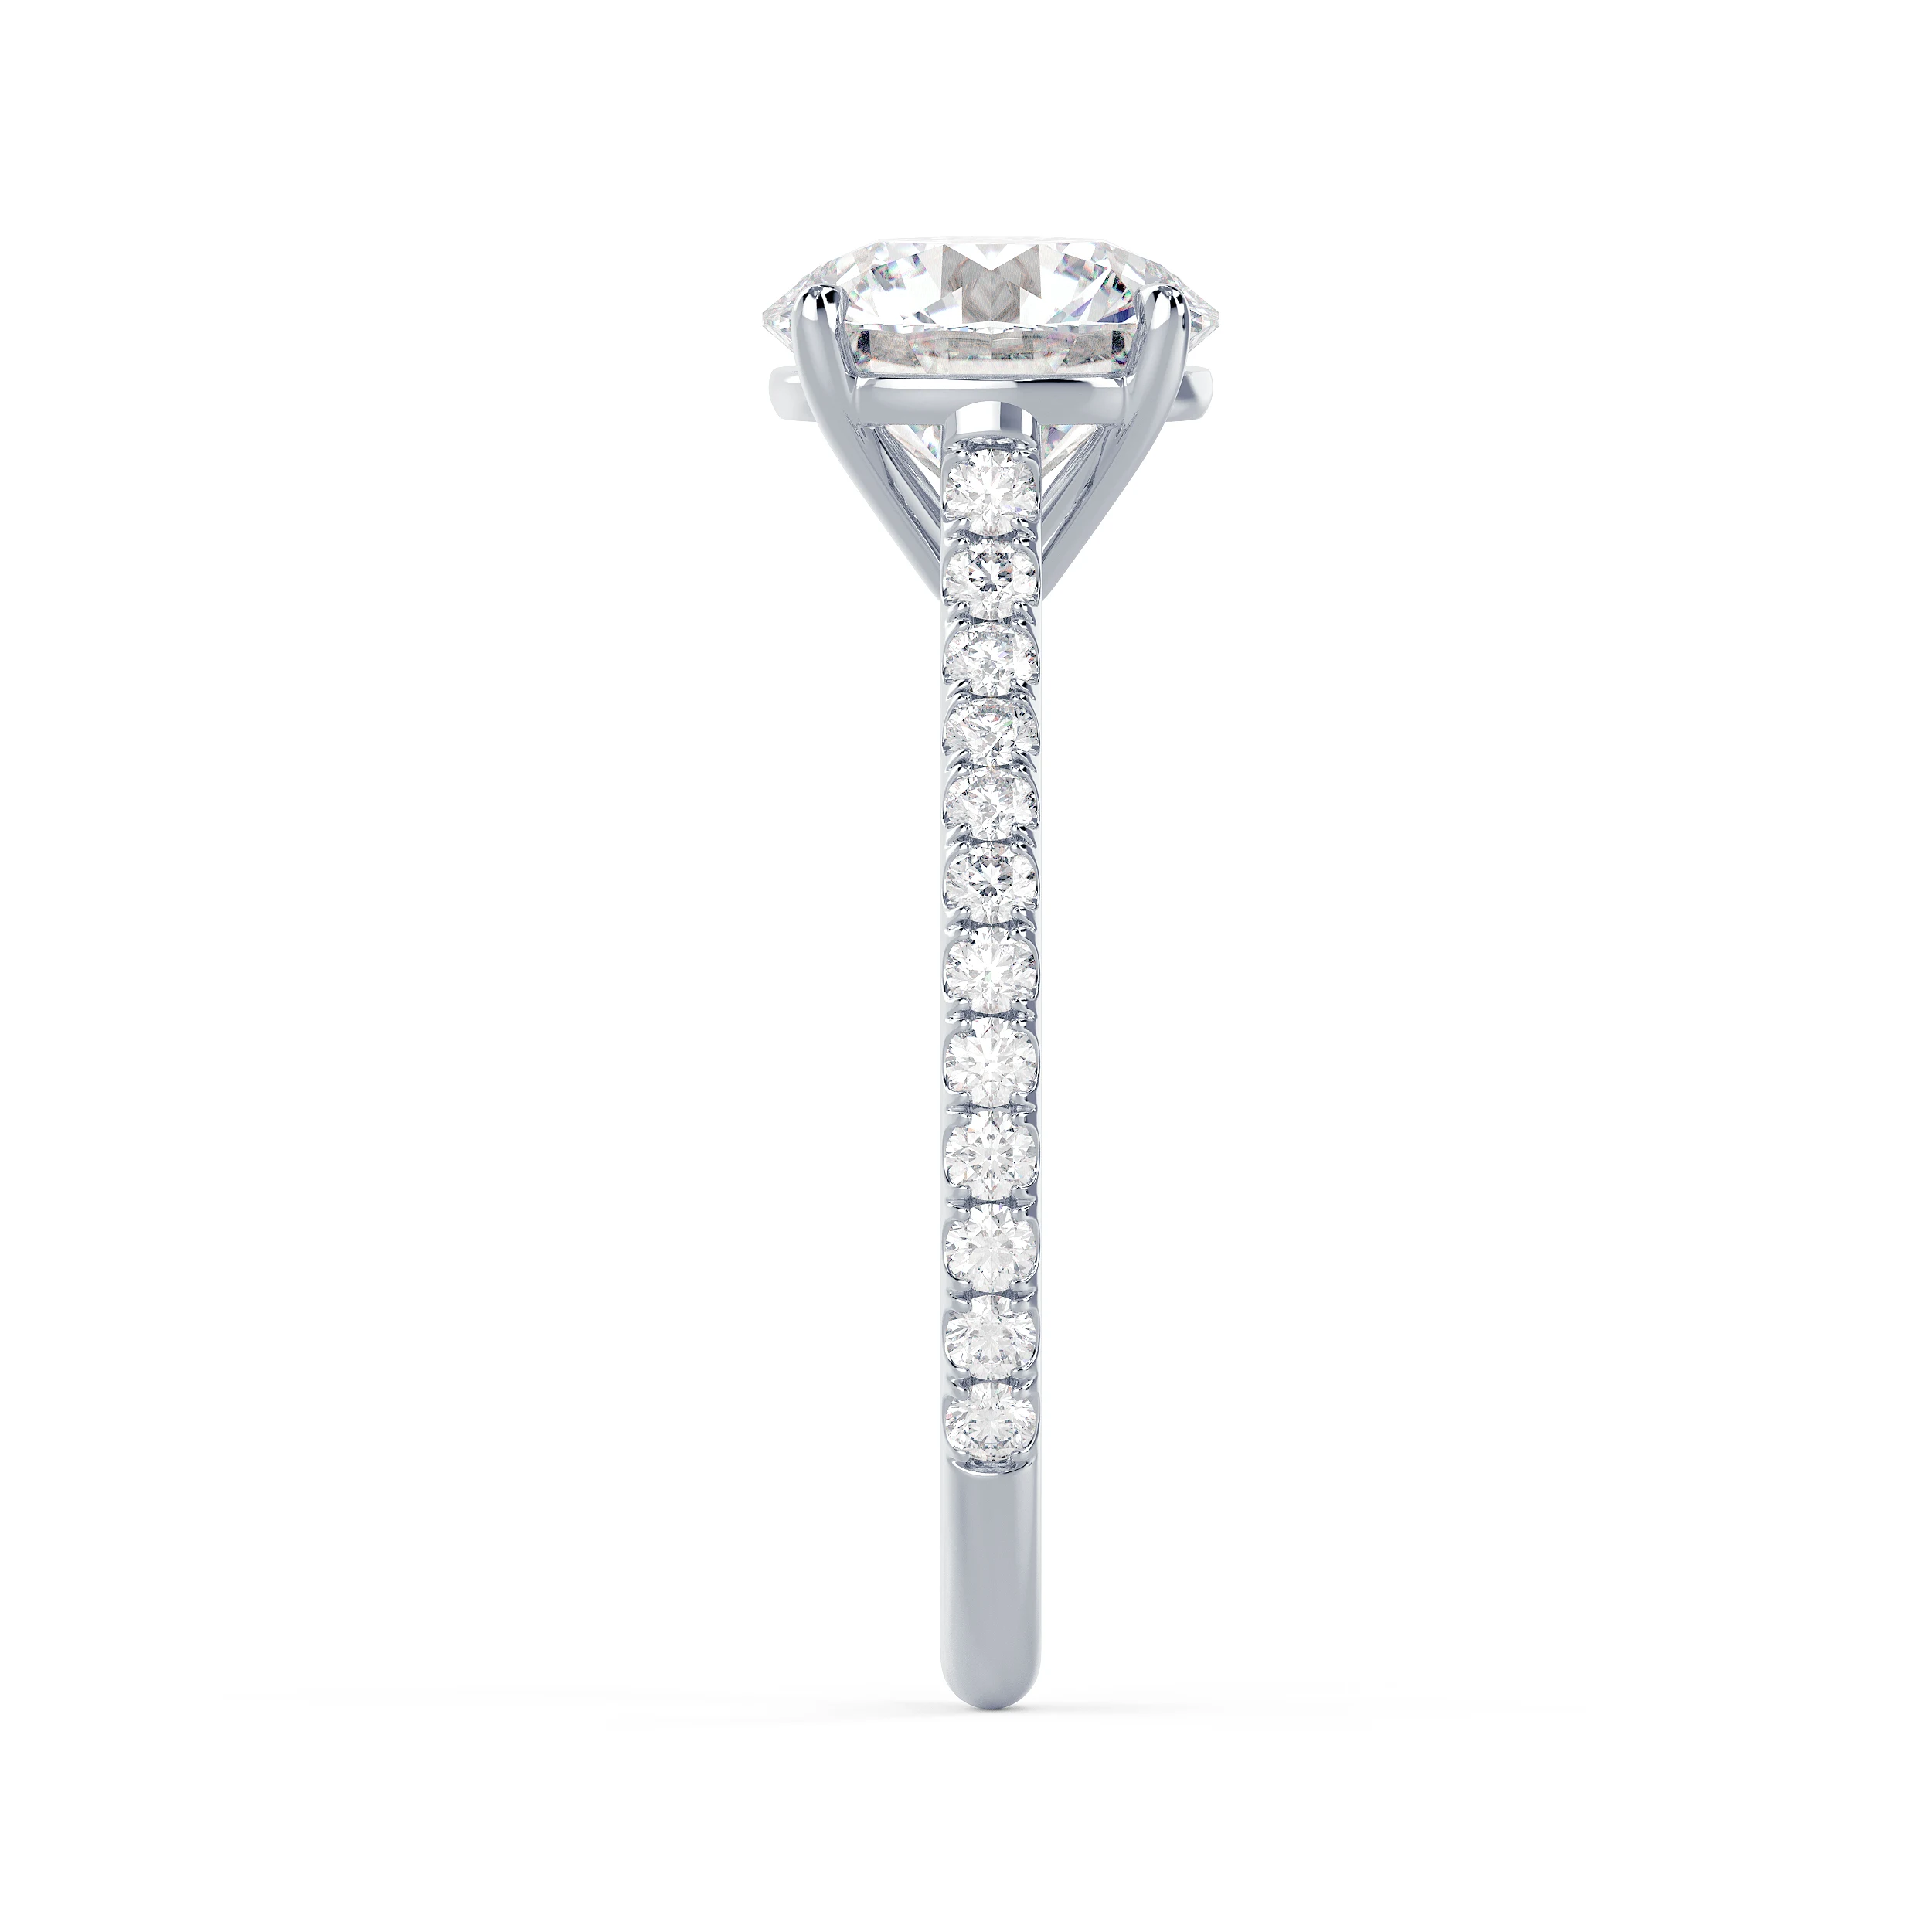 Hand Selected Lab Diamonds set in White Gold Round Cathedral Pavé Setting (Side View)